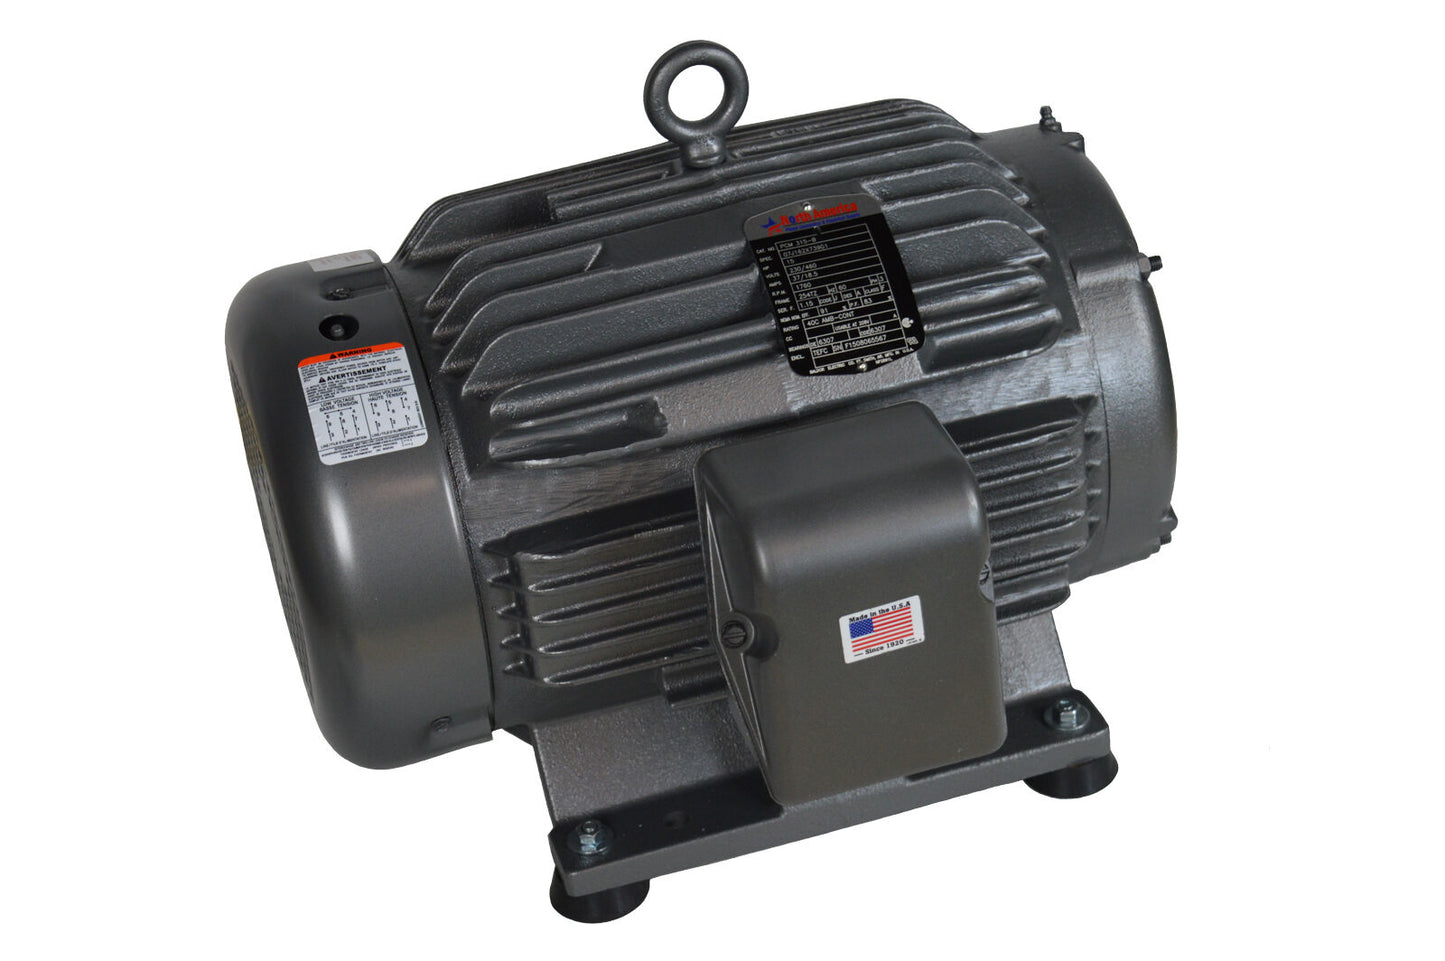 PL-15-T Pro-Line 15HP Rotary Phase Converter - TEFC Idler Motor by Baldor USA